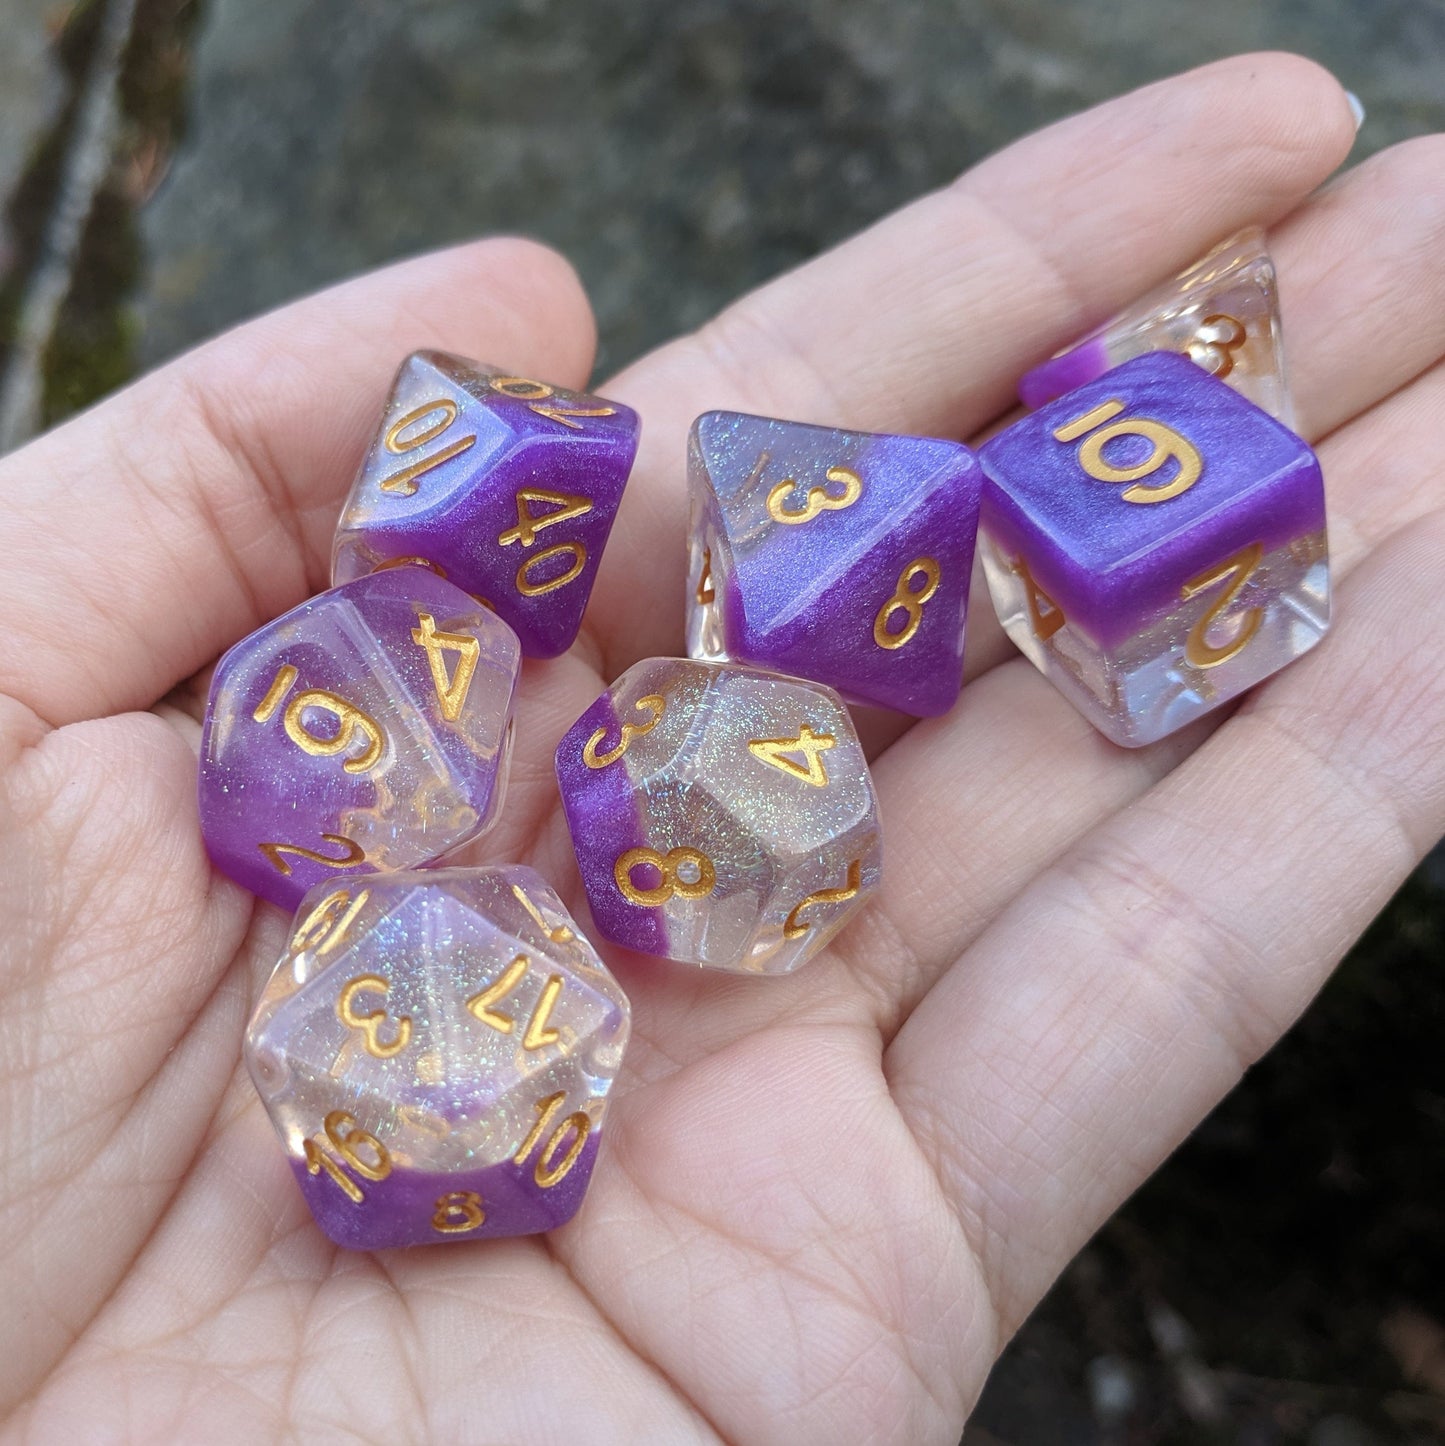 Violet Sunset DnD Dice Set, Shimmering Translucent Glitter Dice with a Purple Bottom Layer - CozyGamer